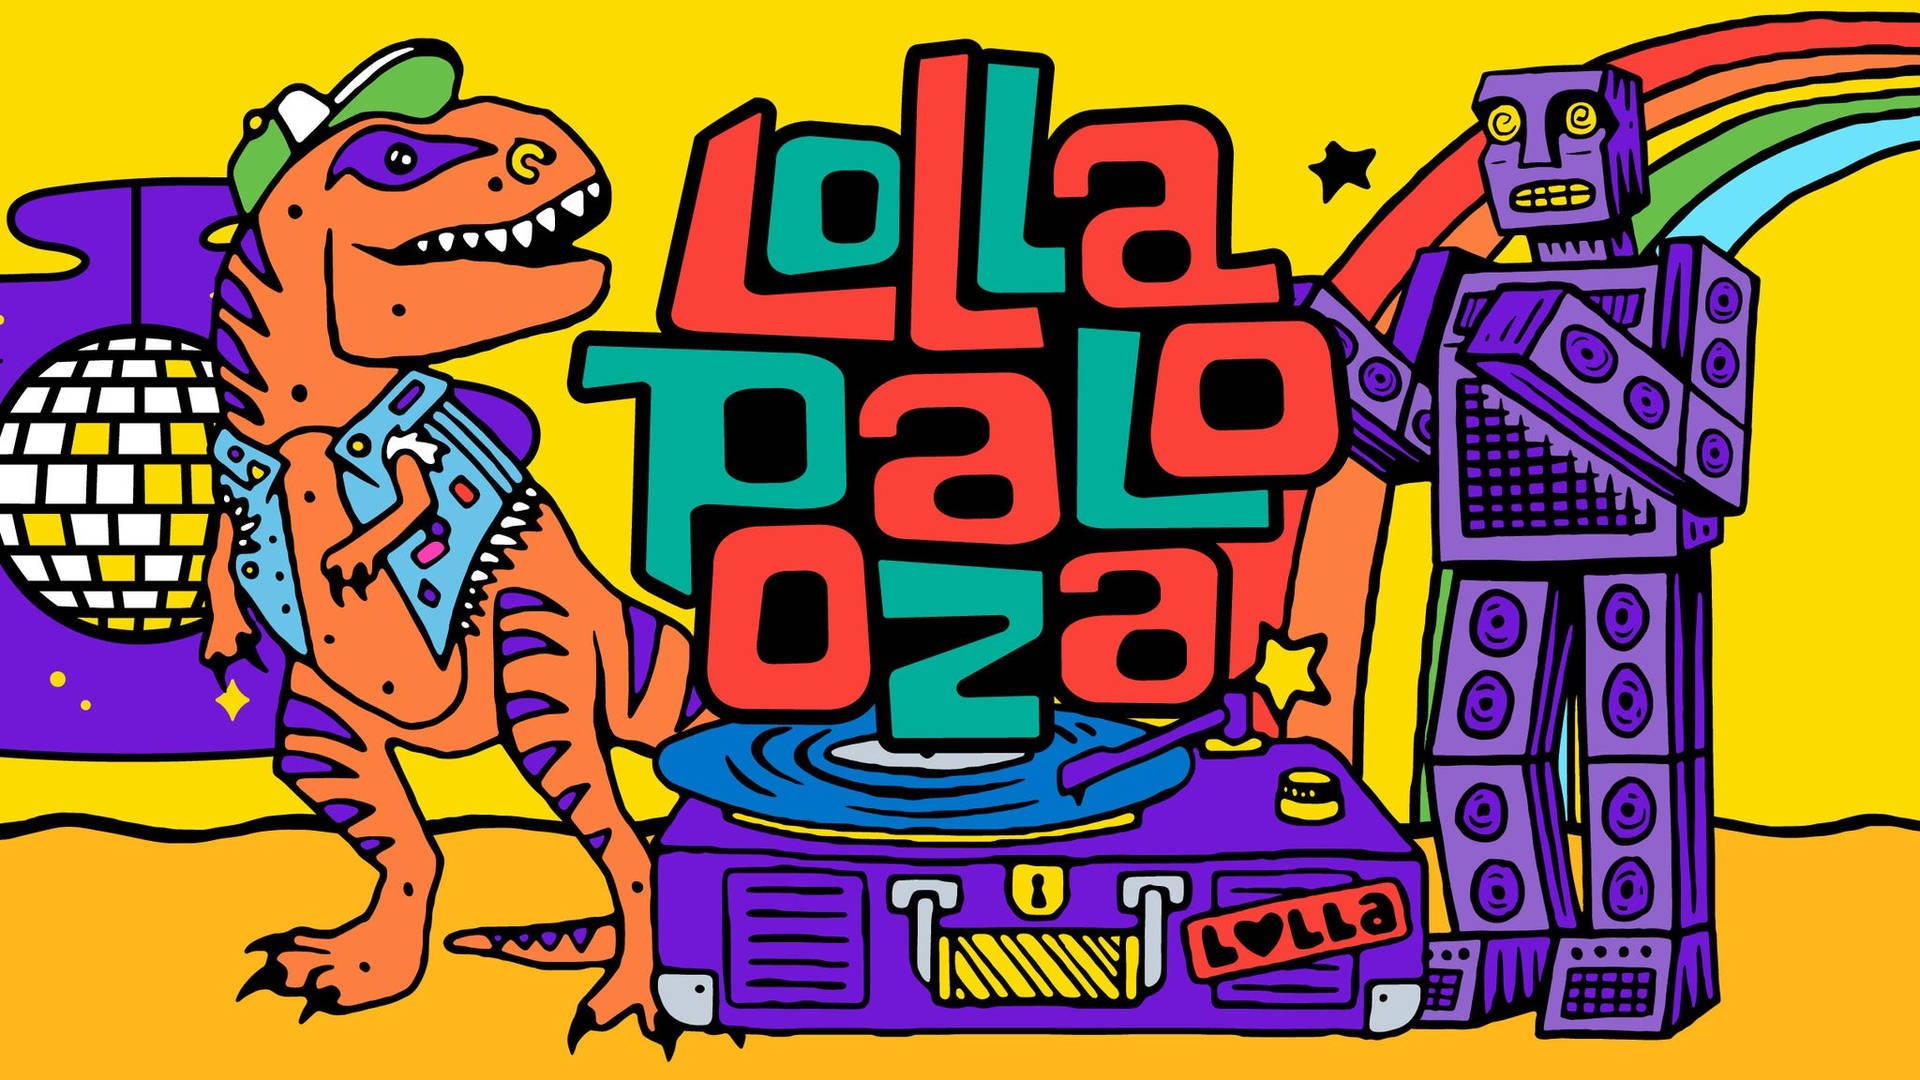 Enjoy The Sounds Of Lollapalooza Music Across Four Stages Background